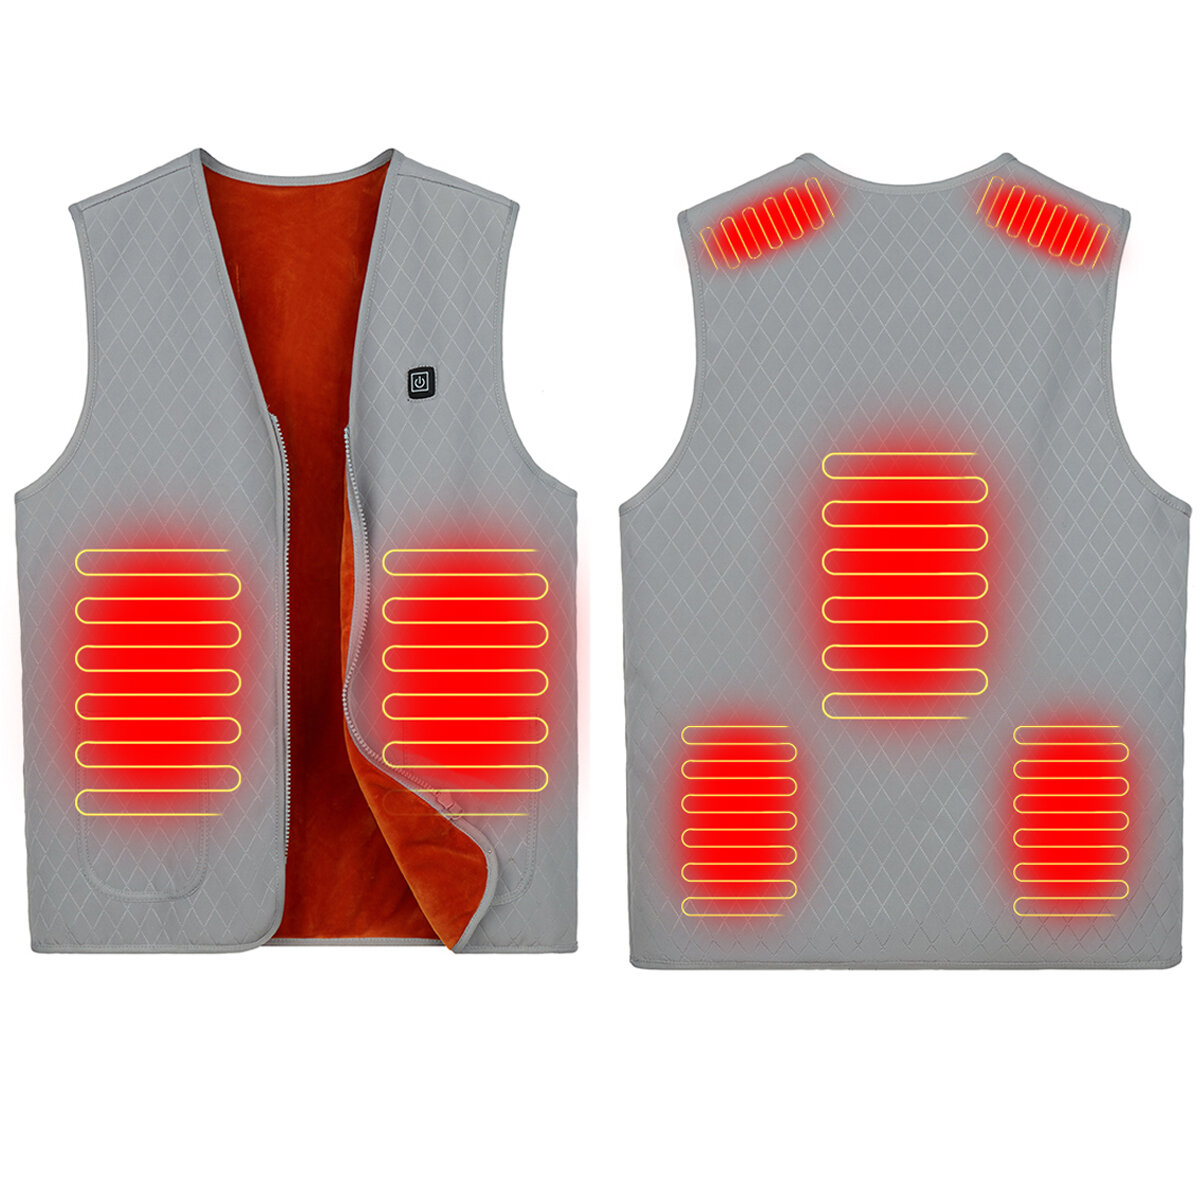 7 Heating Area Electric Heated Vest Jacket USB Thermal Warm Up Pad Body Winter